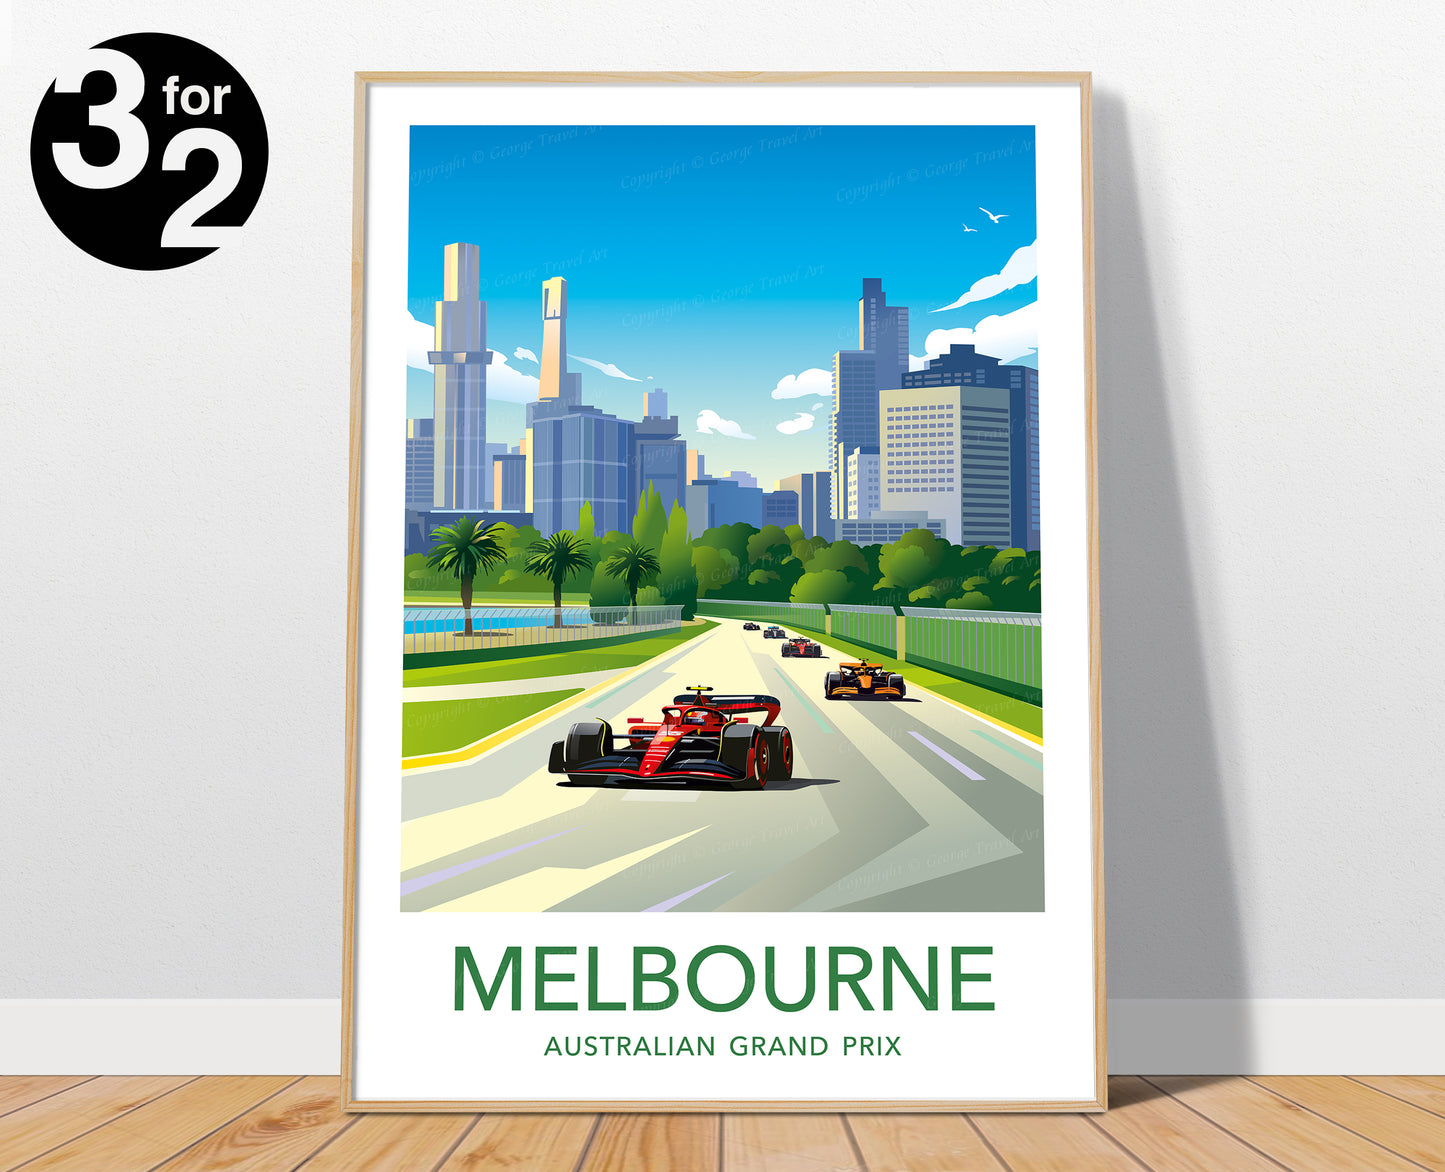 A picturesque Melbourne F1 Poster capturing the iconic Albert Park Grand Prix circuit bathed in sunlight. A striking red Ferrari dominates the track, set against the backdrop of the city's towering skyscrapers. The vibrant scene exudes the excitement of a sunny race day in Melbourne.